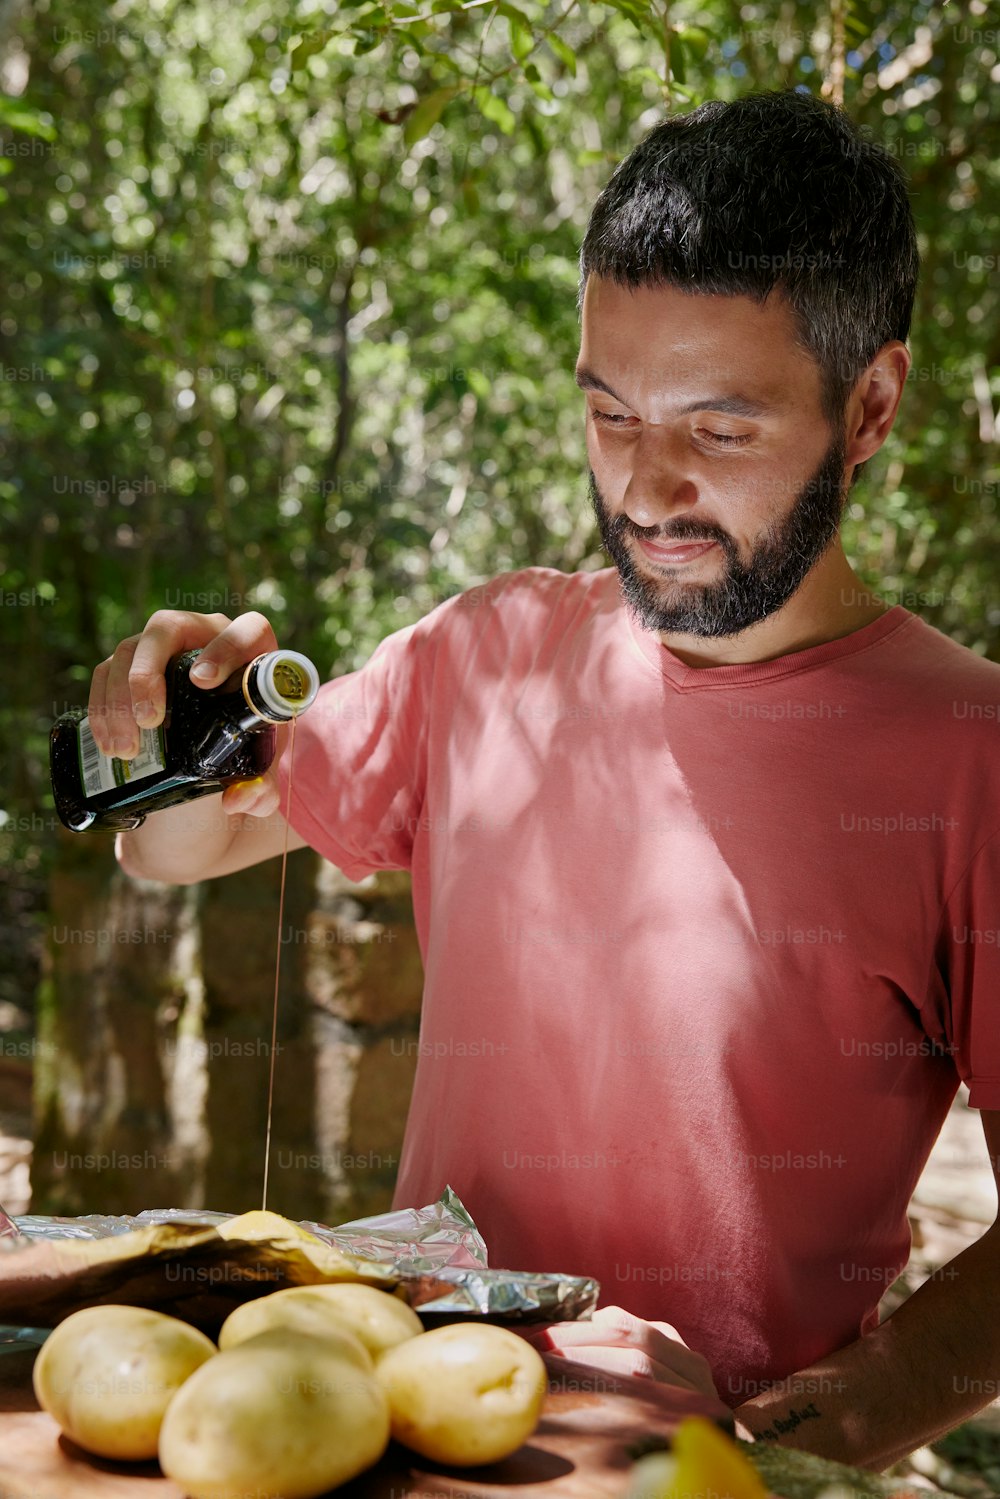 a man with a beard is pouring something into a bottle